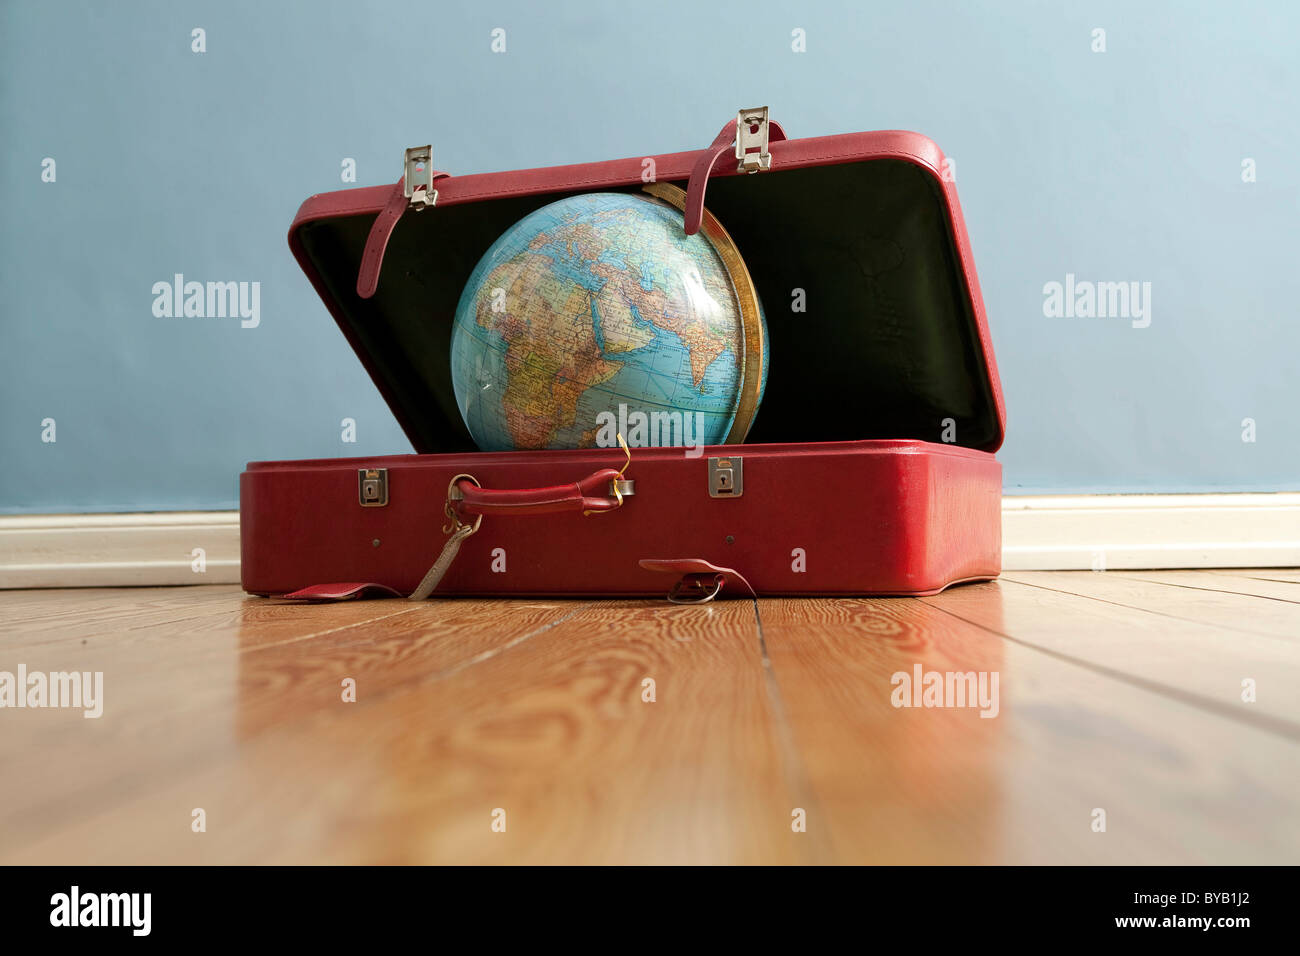 Globe in a suitcase, symbolic image for traveling, vacation, world trip Stock Photo